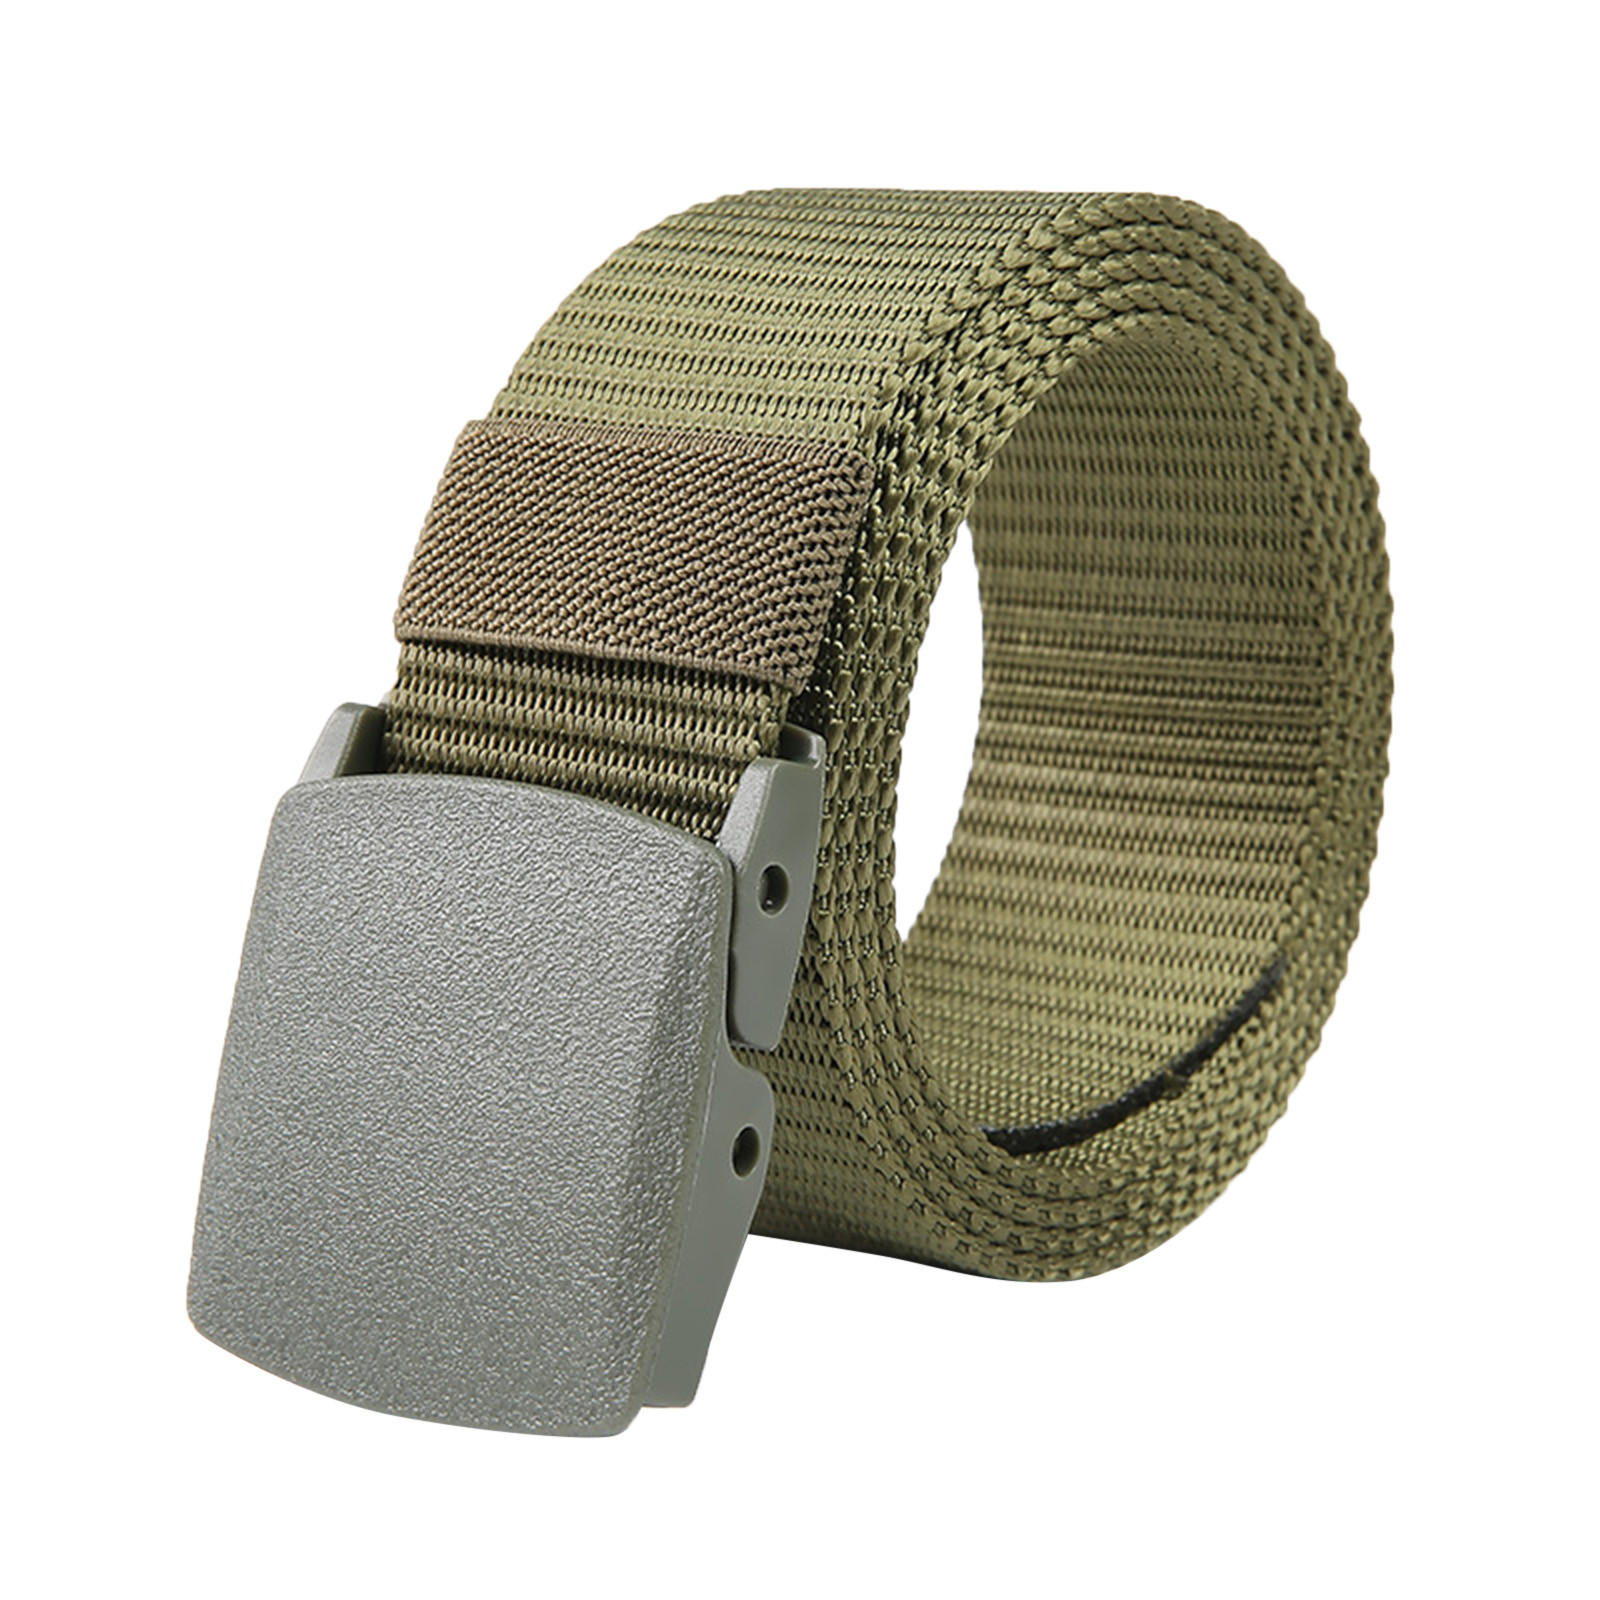 Yubnlvae Belts for Women Mens Adult Unisex Canvas Quick Release Buckle Outer Belt Men's Outdoor Training Belt Belt Army Green - image 1 of 3